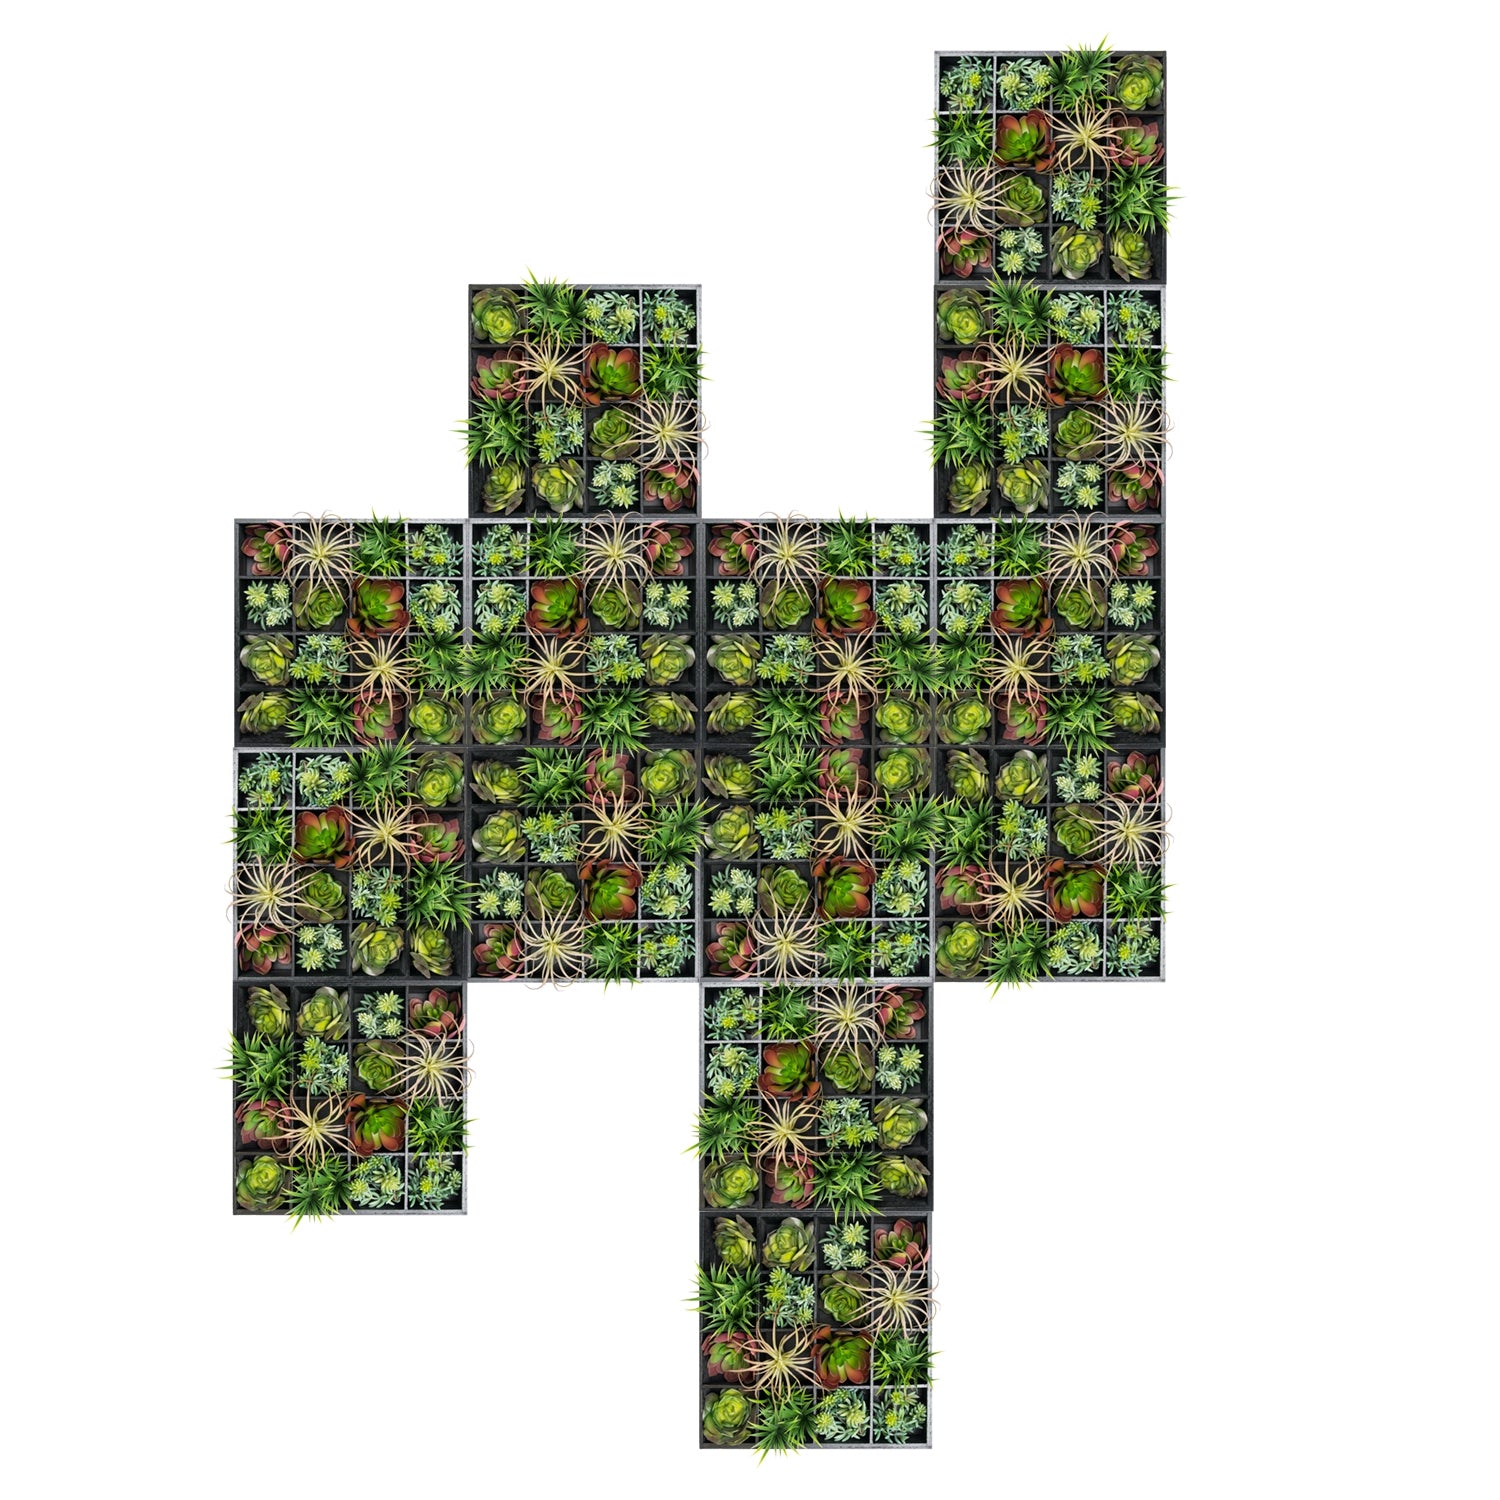 Green Wall, Pixelated Succulent, 16 compartments